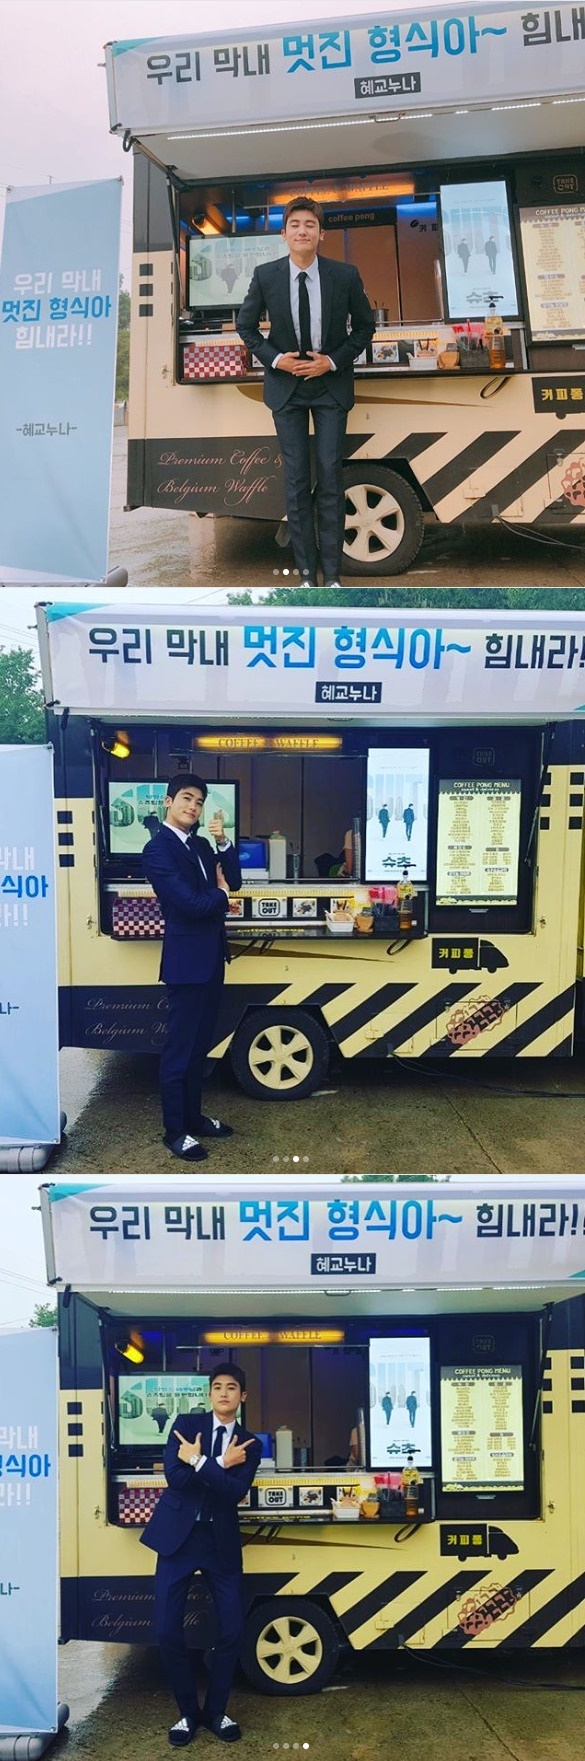 Seoul = = Song Hye-kyo presented a snack tea to his agency junior Park Hyung-sik.On the 22nd, Park Hyung-sik posted a thank you greeting on his SNS along with a picture of a snack car presented by Song Hye-kyo.Park Hyung-sik gave Song Hye-kyos gift to thank you for saying, My sister is loyal to our sister who sends me a snack car at once.Park Hyung-sik in the photo poses in front of a snack car presented by Song Hye-kyo.In the gift of Song Hye-kyo, Park Hyung-sik puts his hands on his navel and greets him with a greeting, and in another photo, he poses with his fingers to make a V and like him.Park Hyung-sik is appearing as a genius matching king who has worked as a lawyer at a law firm without a certificate at the chance of chance at SBS tree Suits.